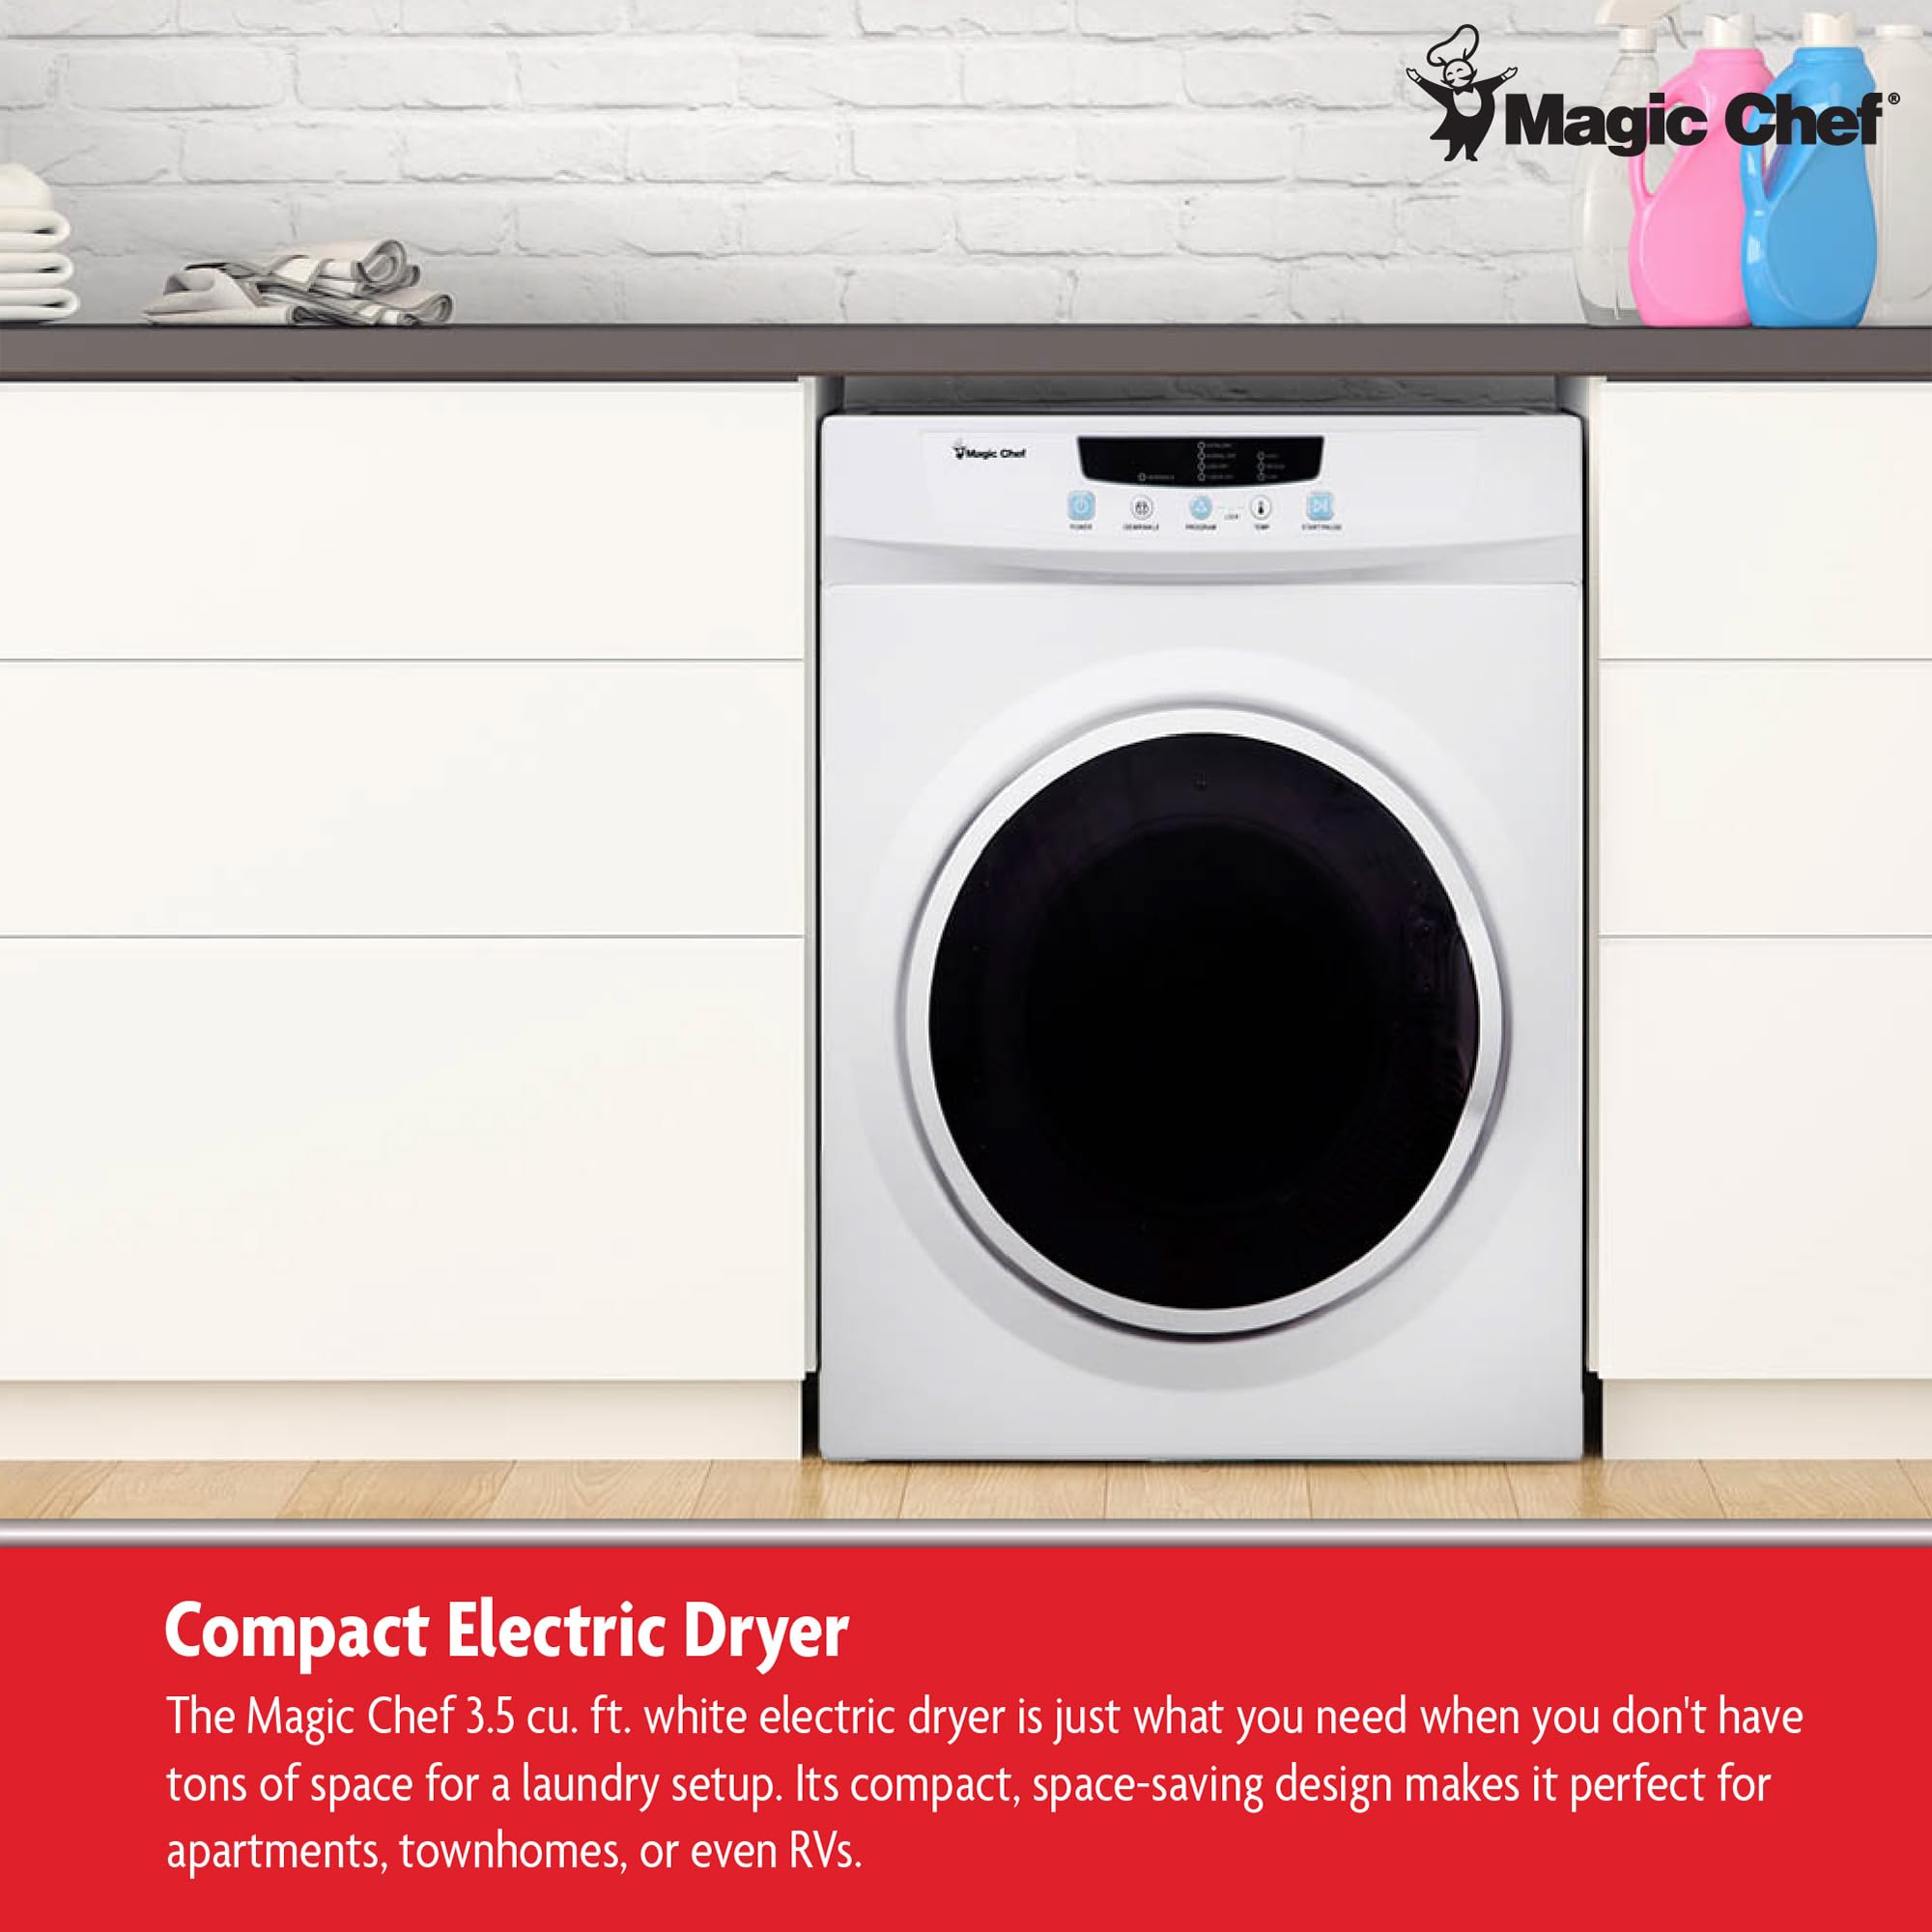 Magic Chef Compact Laundry Dryer Machine, Portable Dryer for Small Spaces, 3.5 Cubic Feet, White